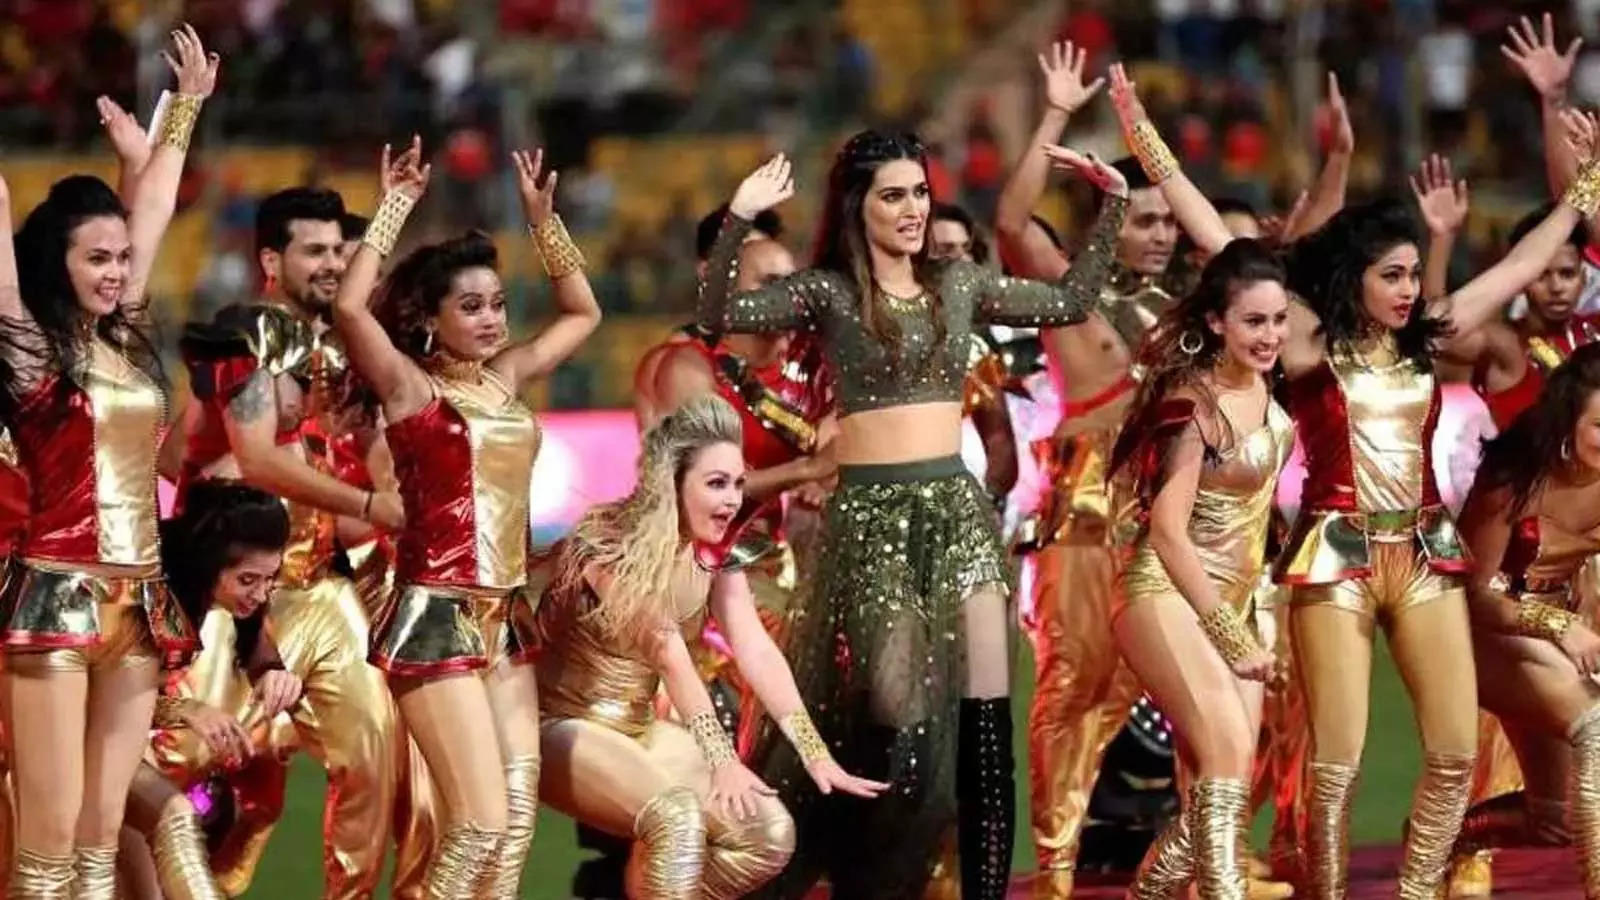 IPL 2022 could have a closing ceremony